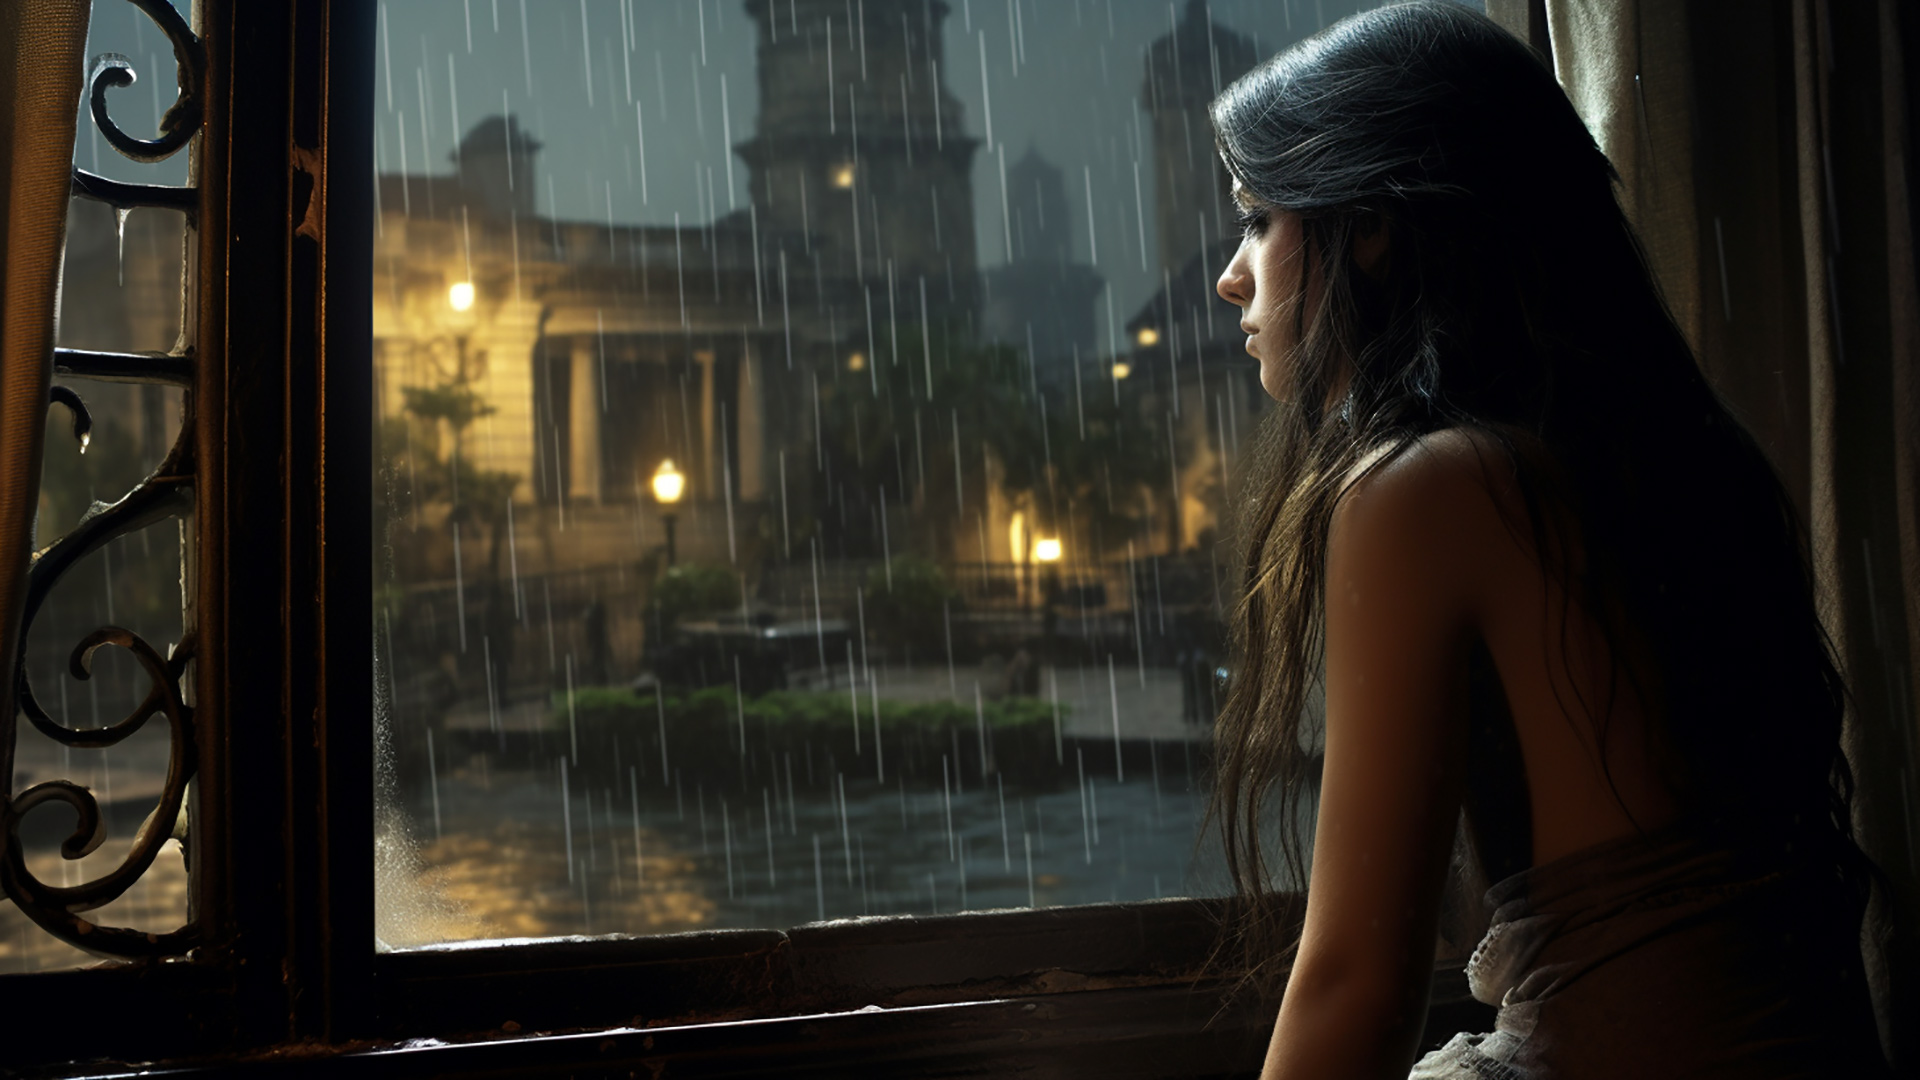 4k Rainy day scenes with a girl behind the glass wallpaper